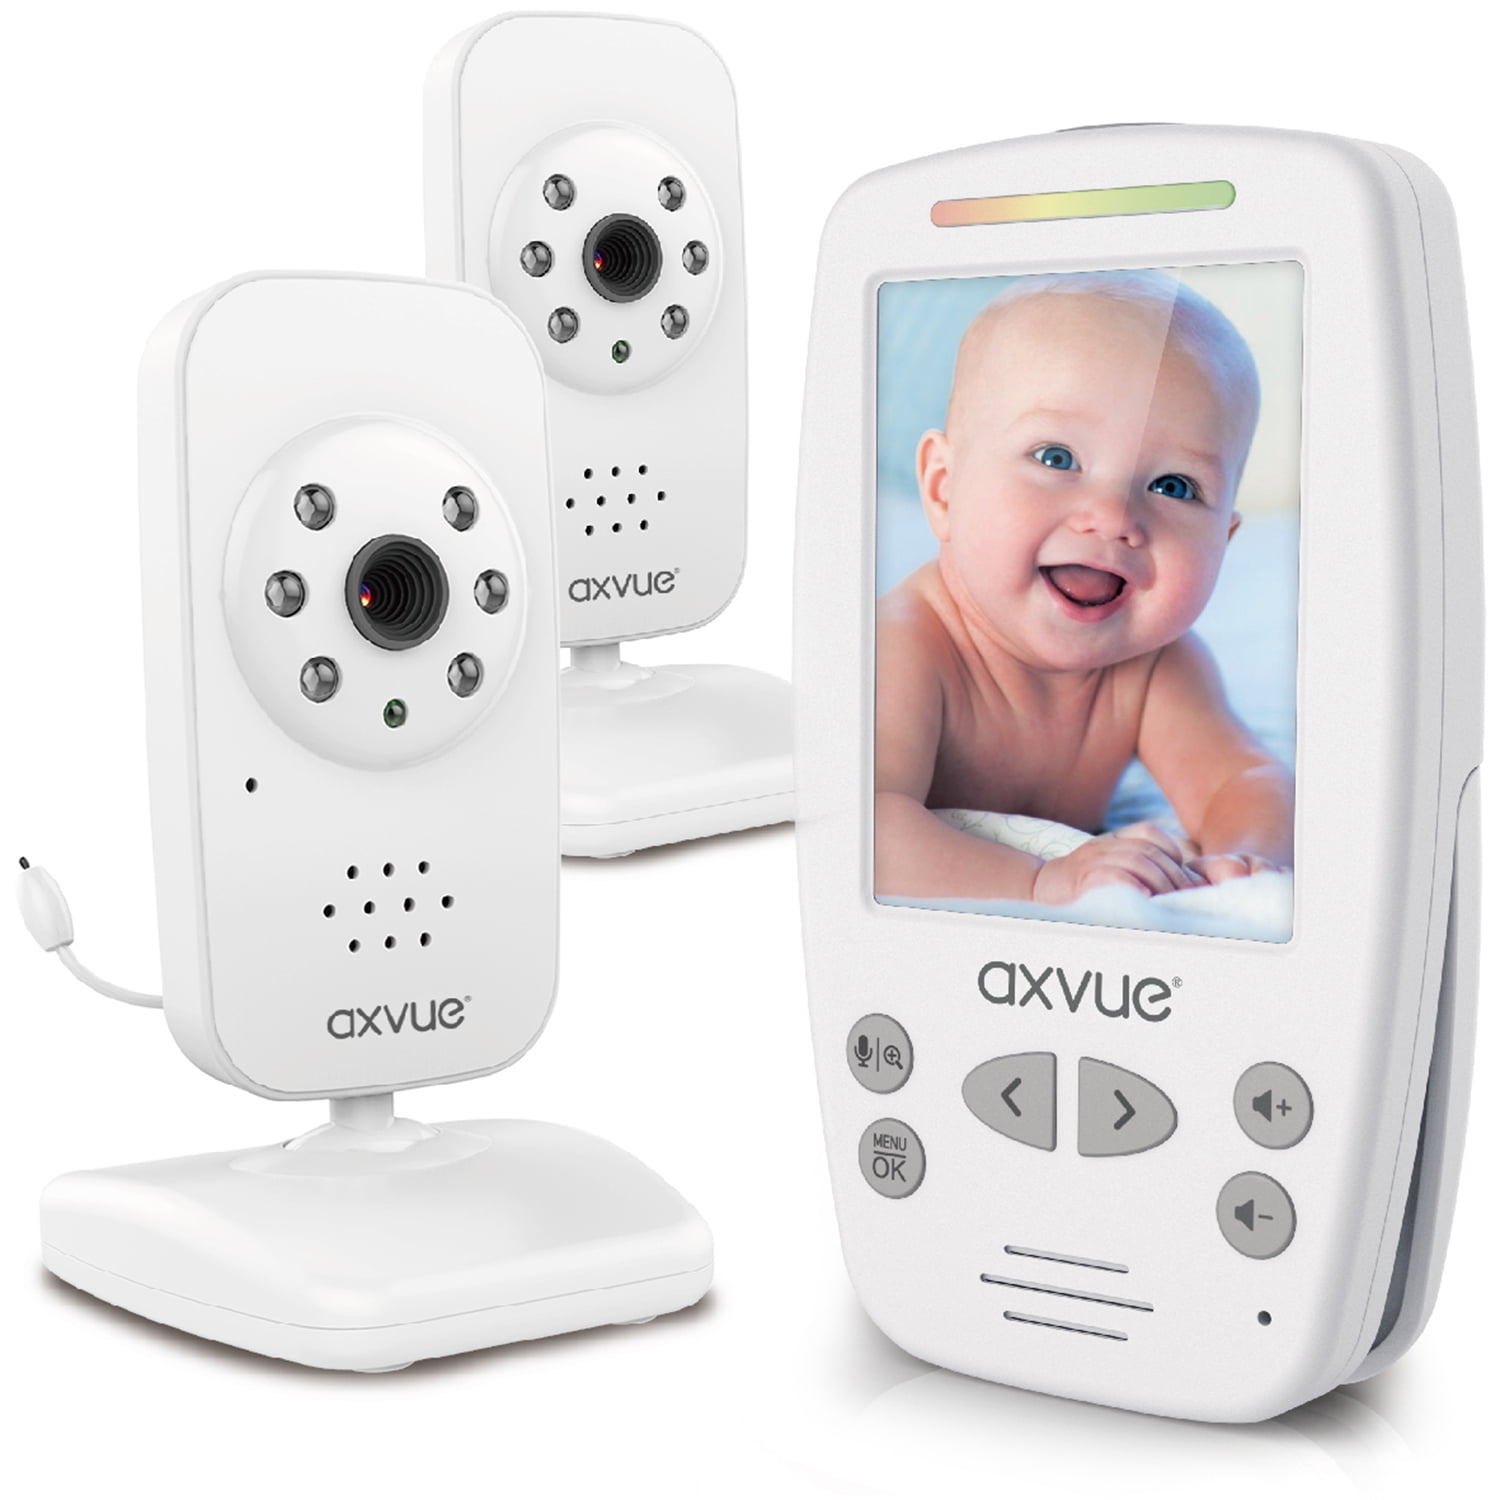 Axvue E612 Video Baby Monitor 4.3" LCD Screen and 2 Camera NEW UNIT 